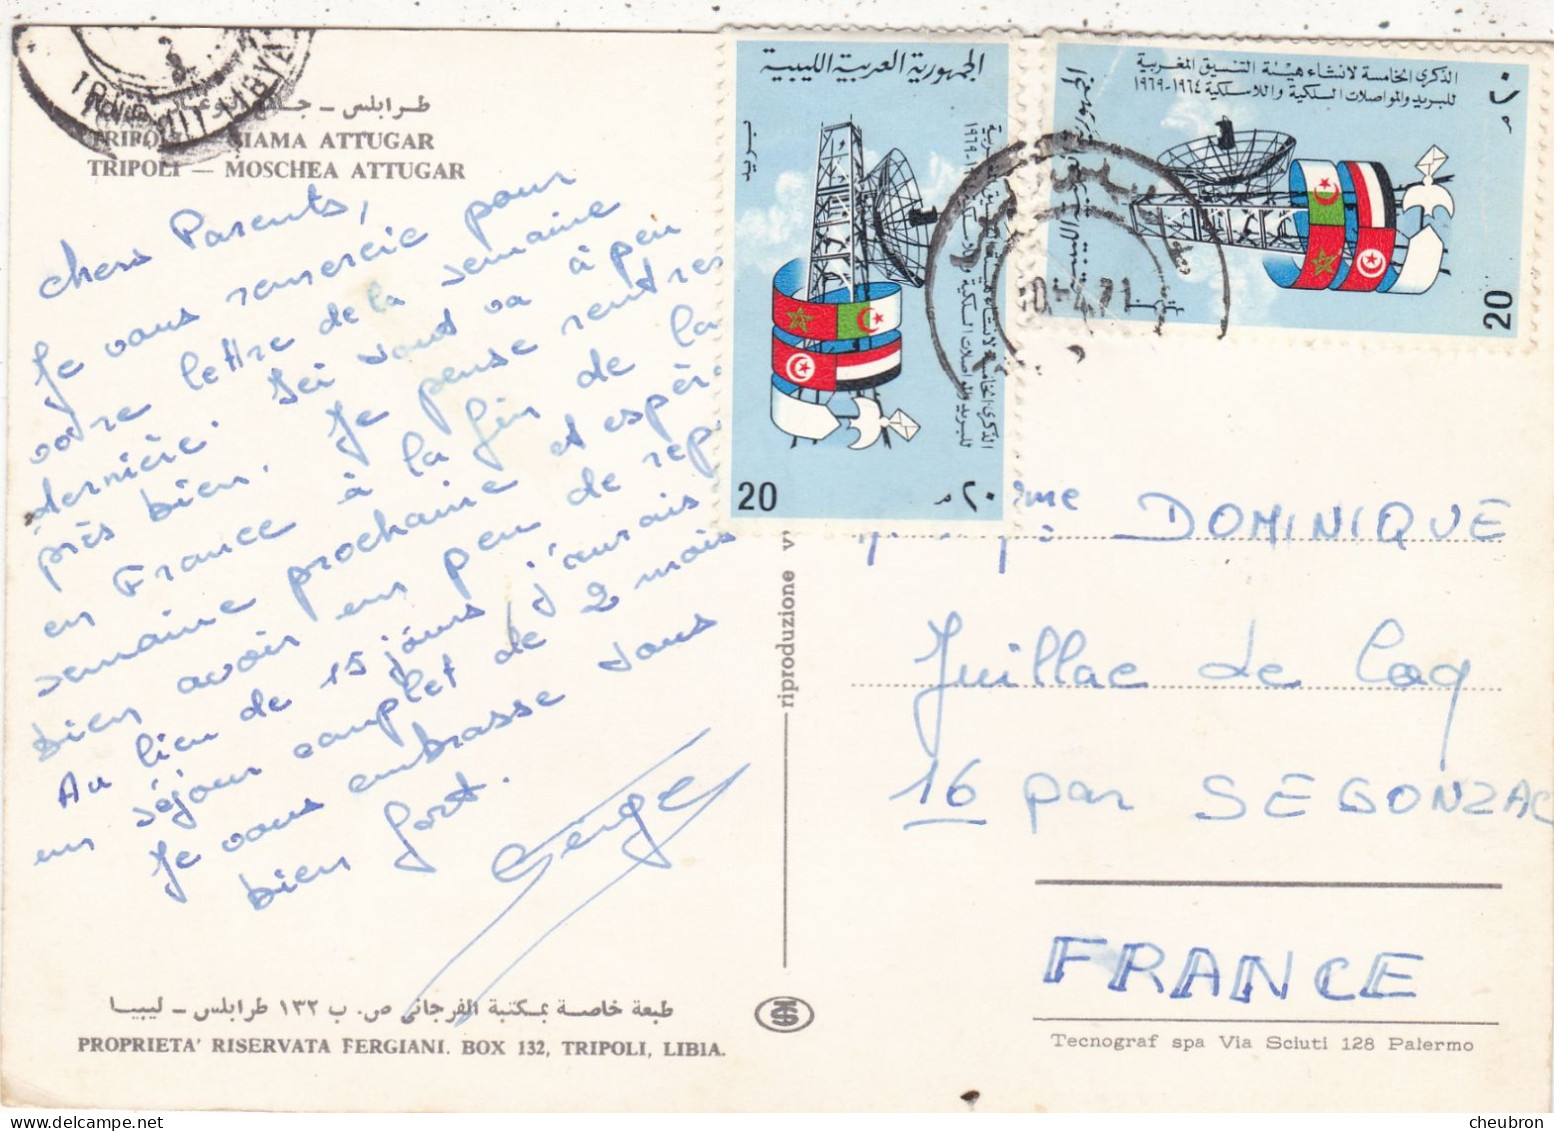 LIBYE. " MOSCHEA ATTUGAR ". STATION SERVICE AGIP. 403 POEUGEOT FAMILIALE. .ANNEE 1971 + TEXTE + TIMBRES - Libya